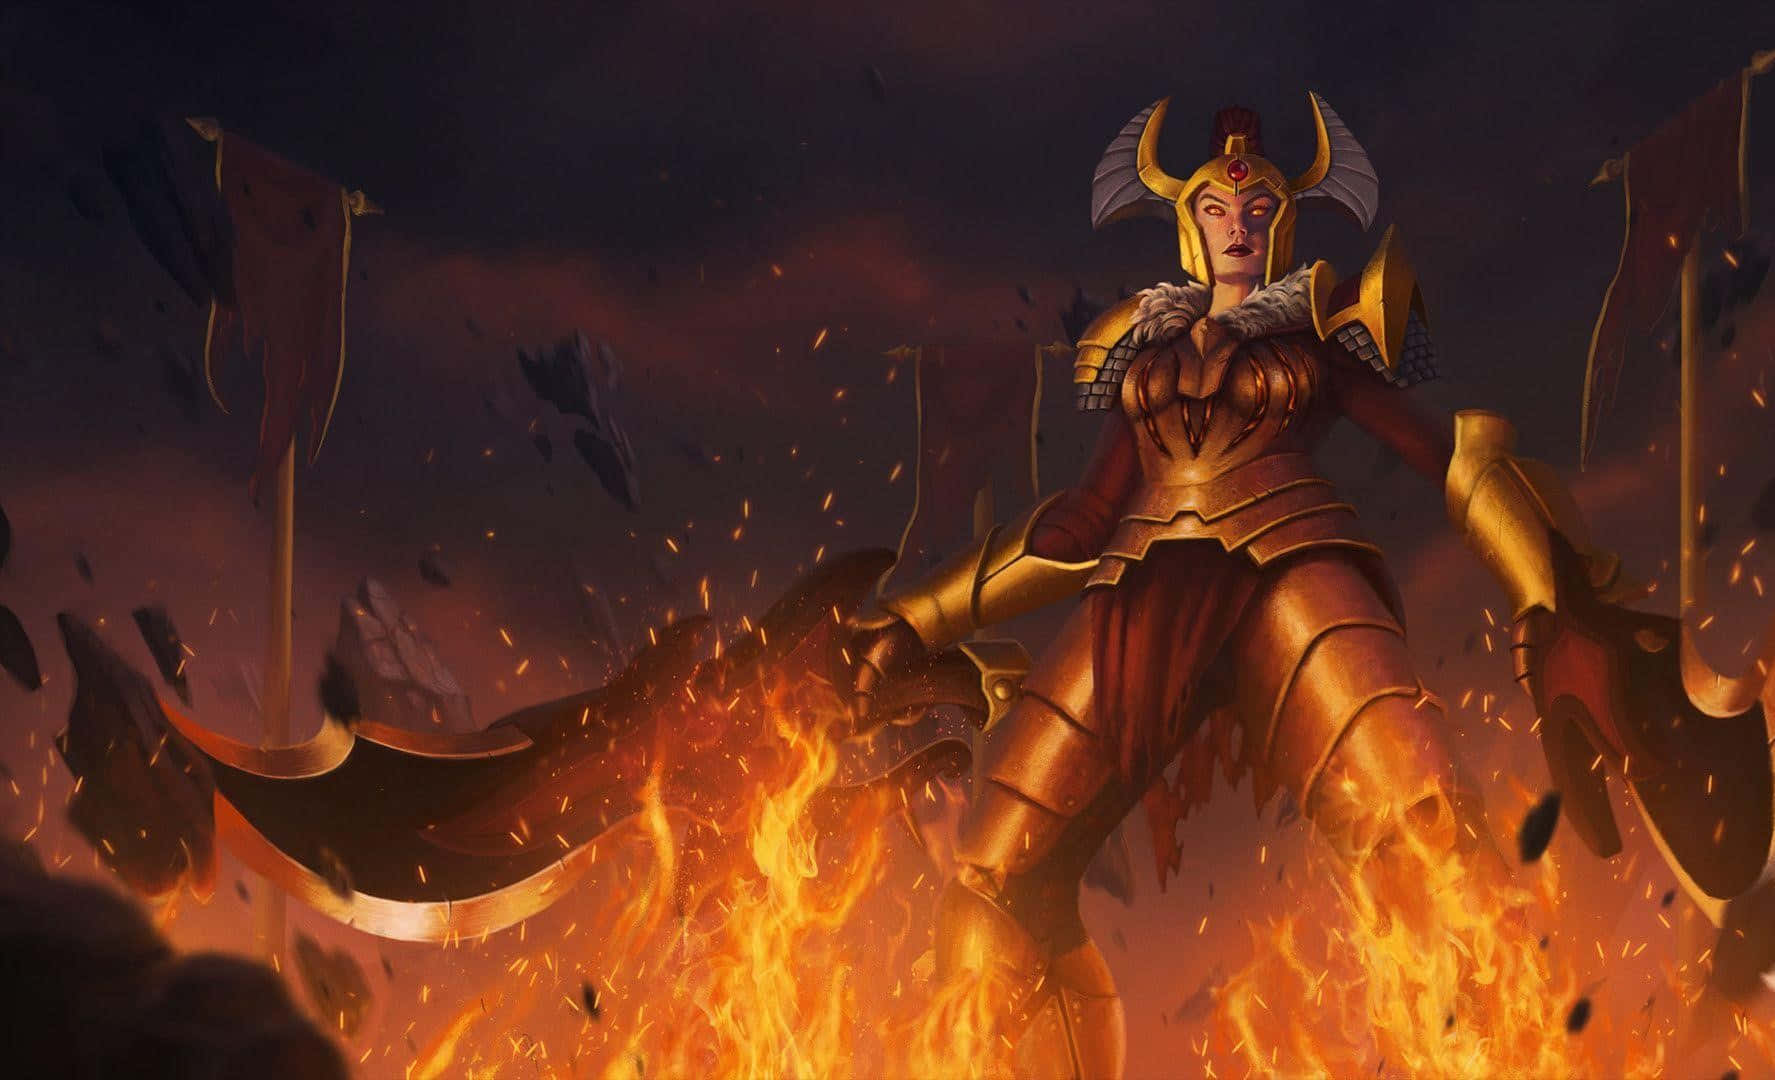 Legion Commander charging victoriously into battle Wallpaper